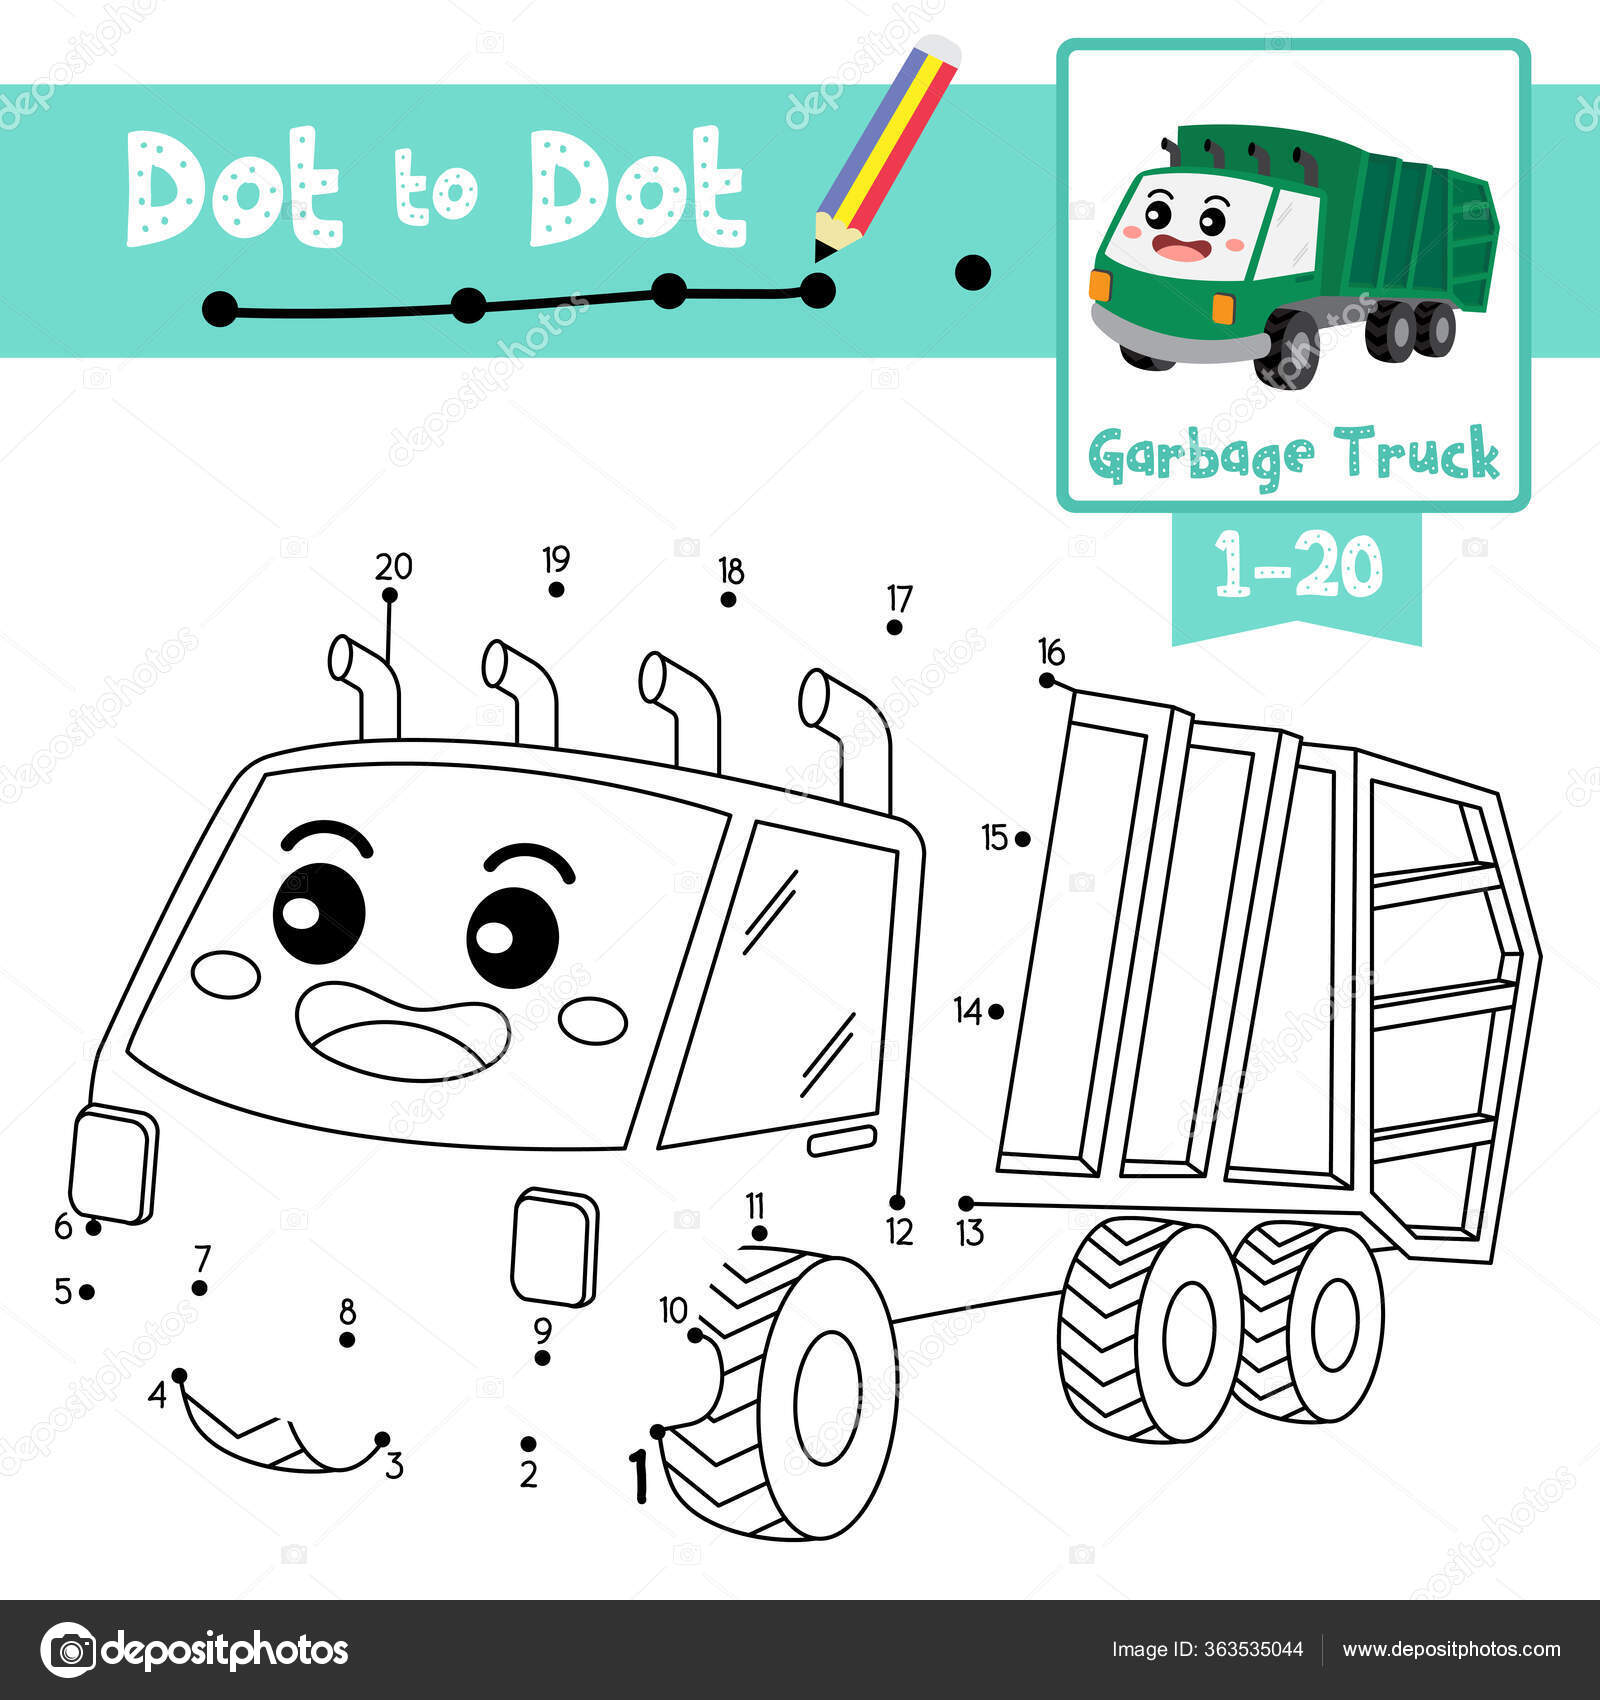 Download Dot To Dot Truck Pictures